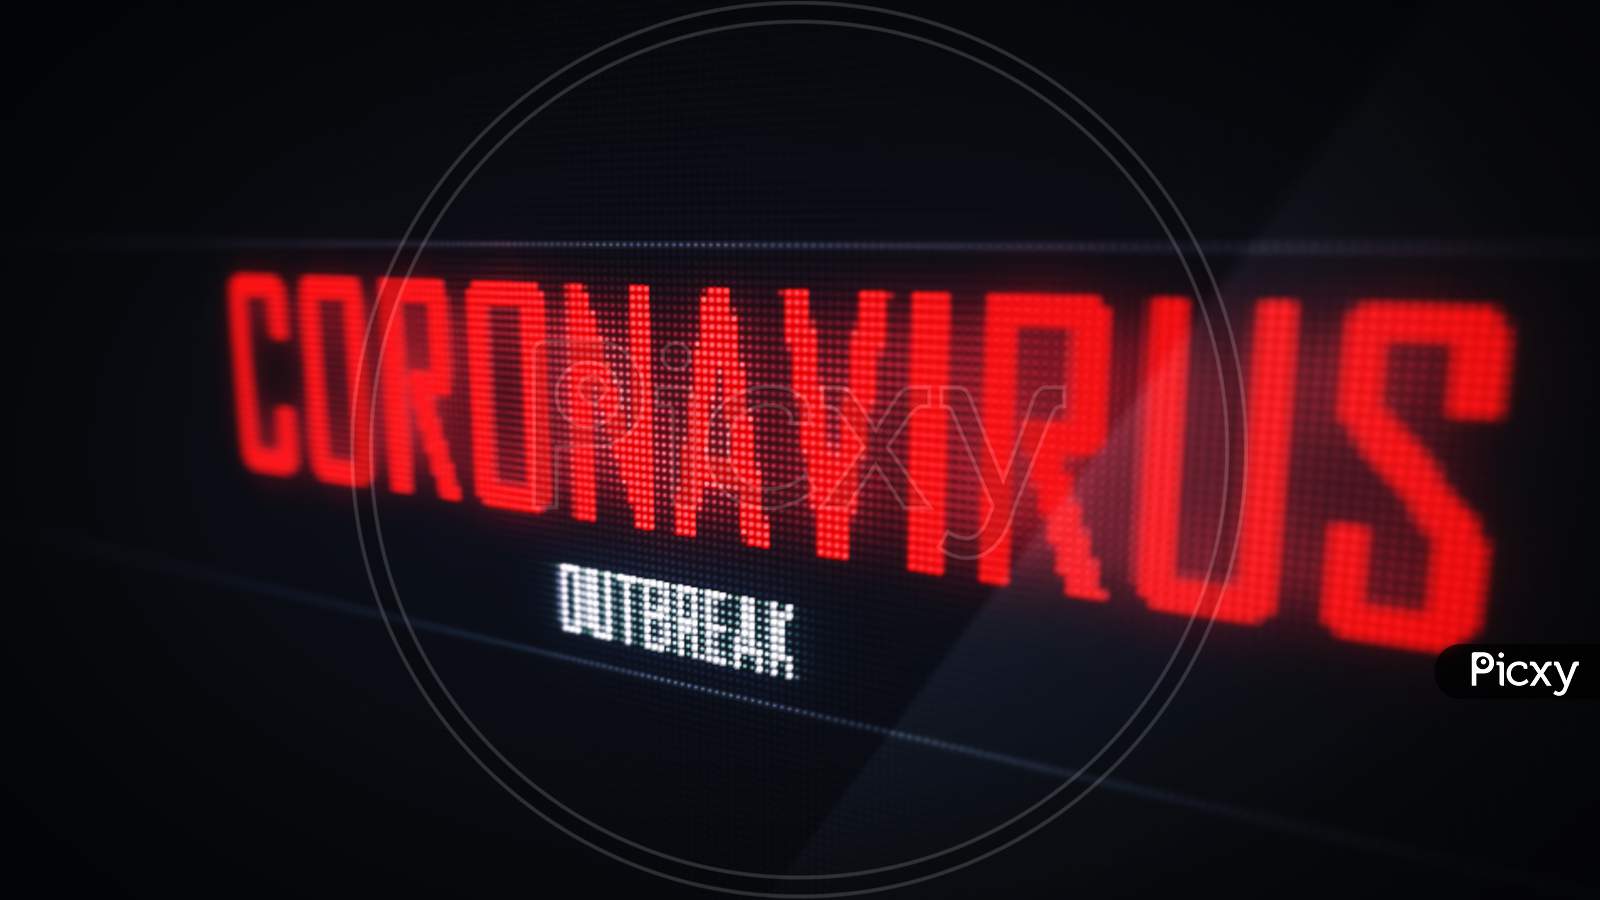 Closeup Red Coronavirus Outbreak Warning Text On Computer Pixelated Green Screen Display Background. 3D Illustration Rendering Alphabet. Healthcare And Medical Concept. Health Researching Influenza.